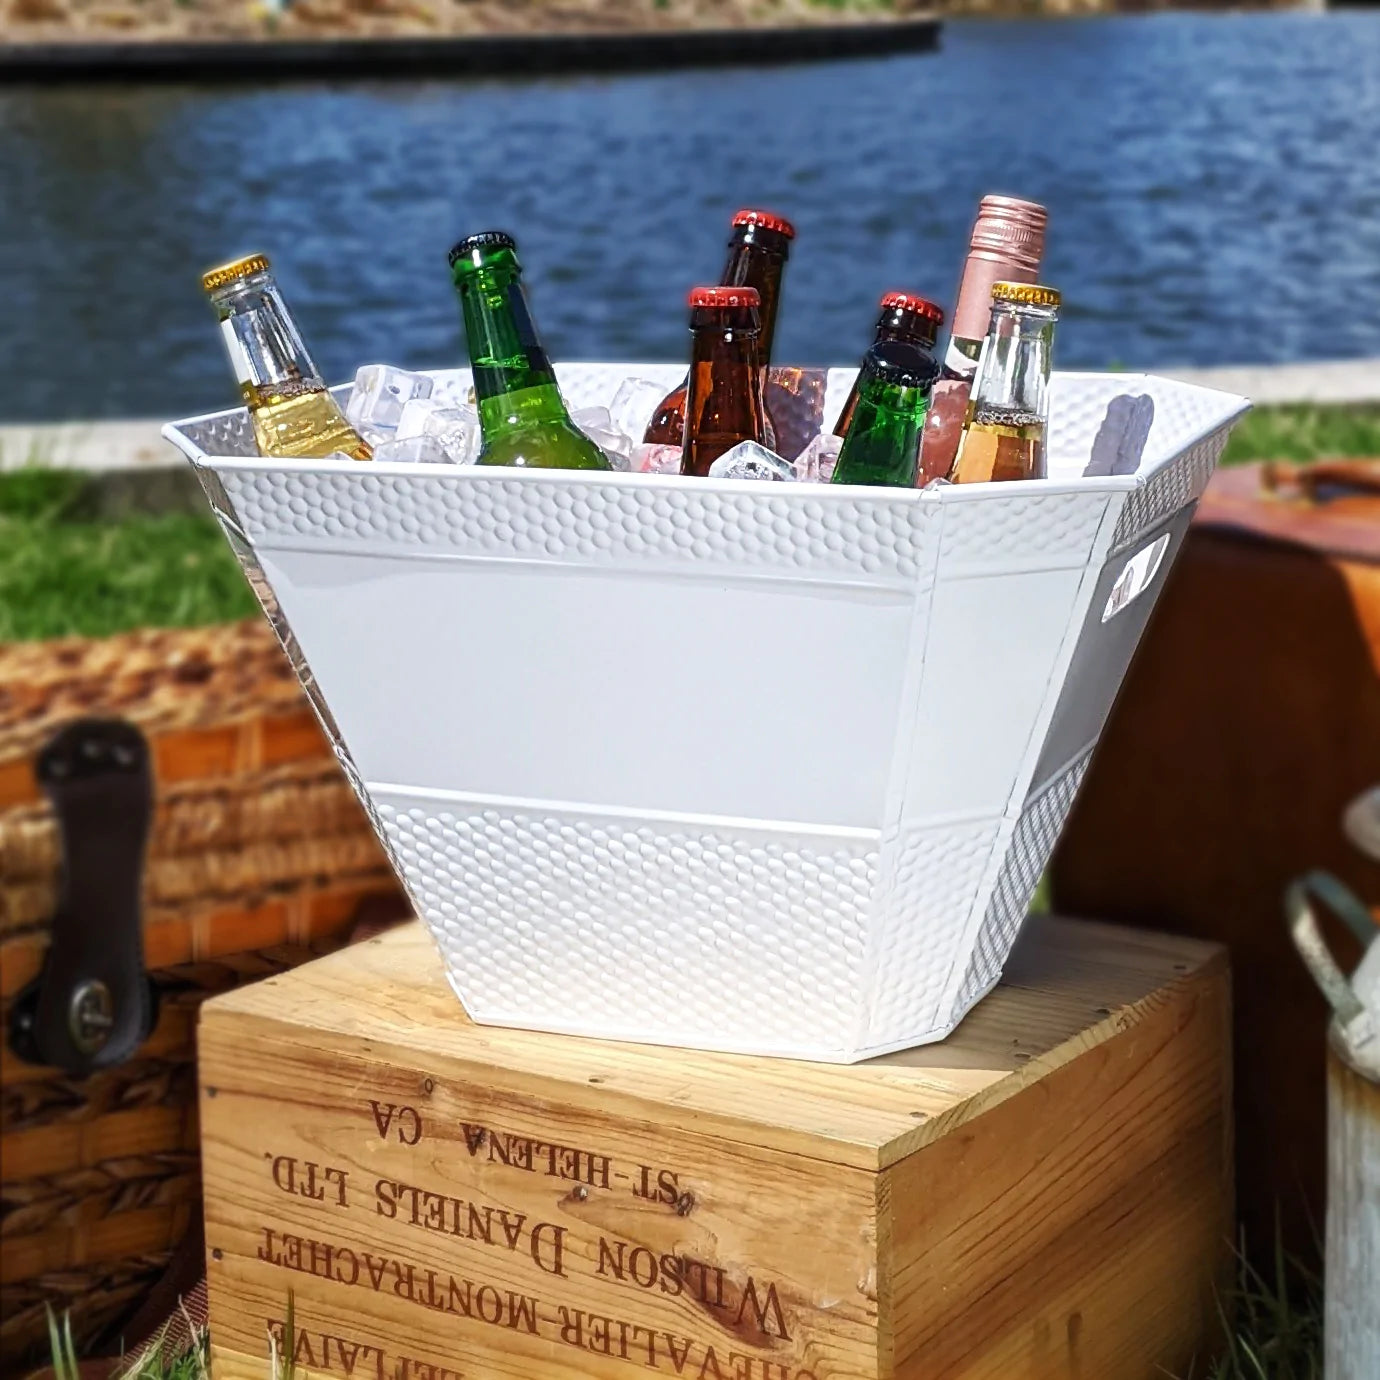 White party bucket to chill wine, beer, or drinks for a party.  Use in the kitchen, bar, dining room, or on the patio to celebrate wedding, anniversary, birthday or the holidays.  Very popular for the summer season and the holiday season.